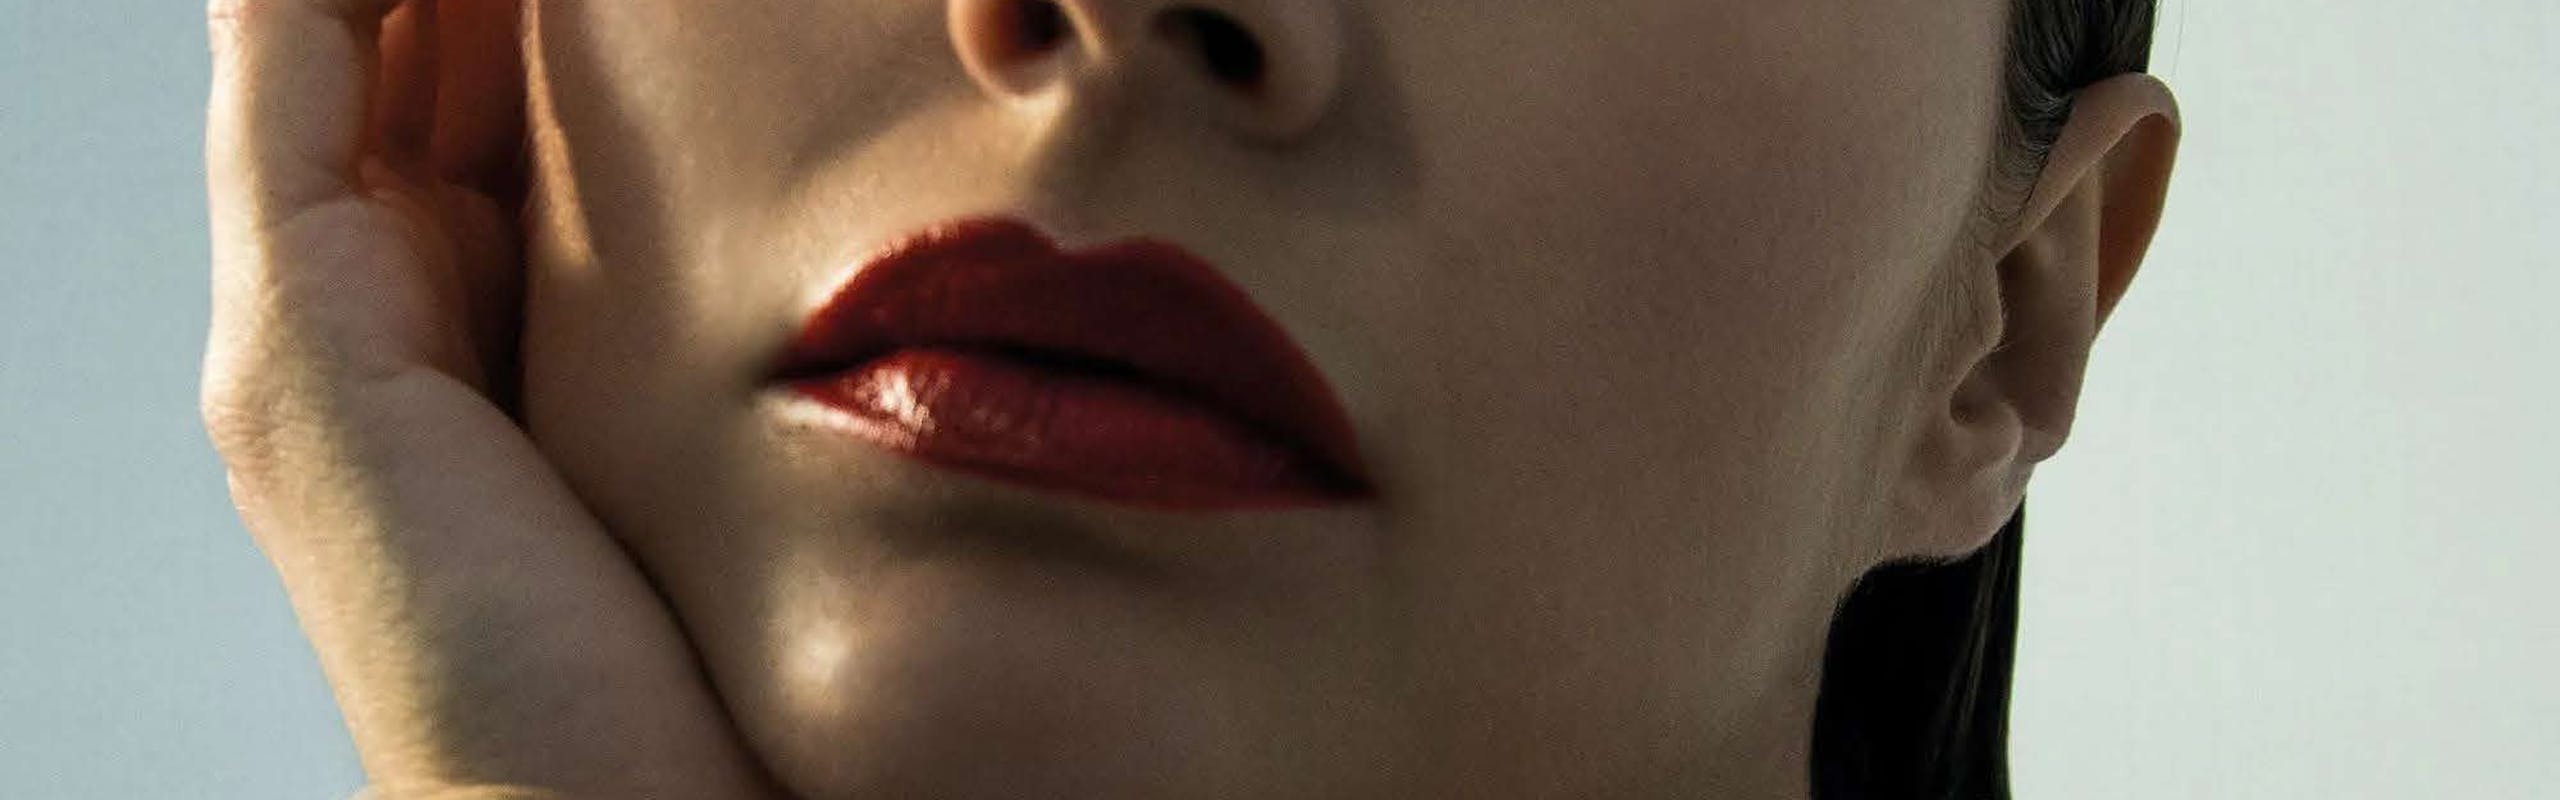 model in red lipstick; national lipstick day